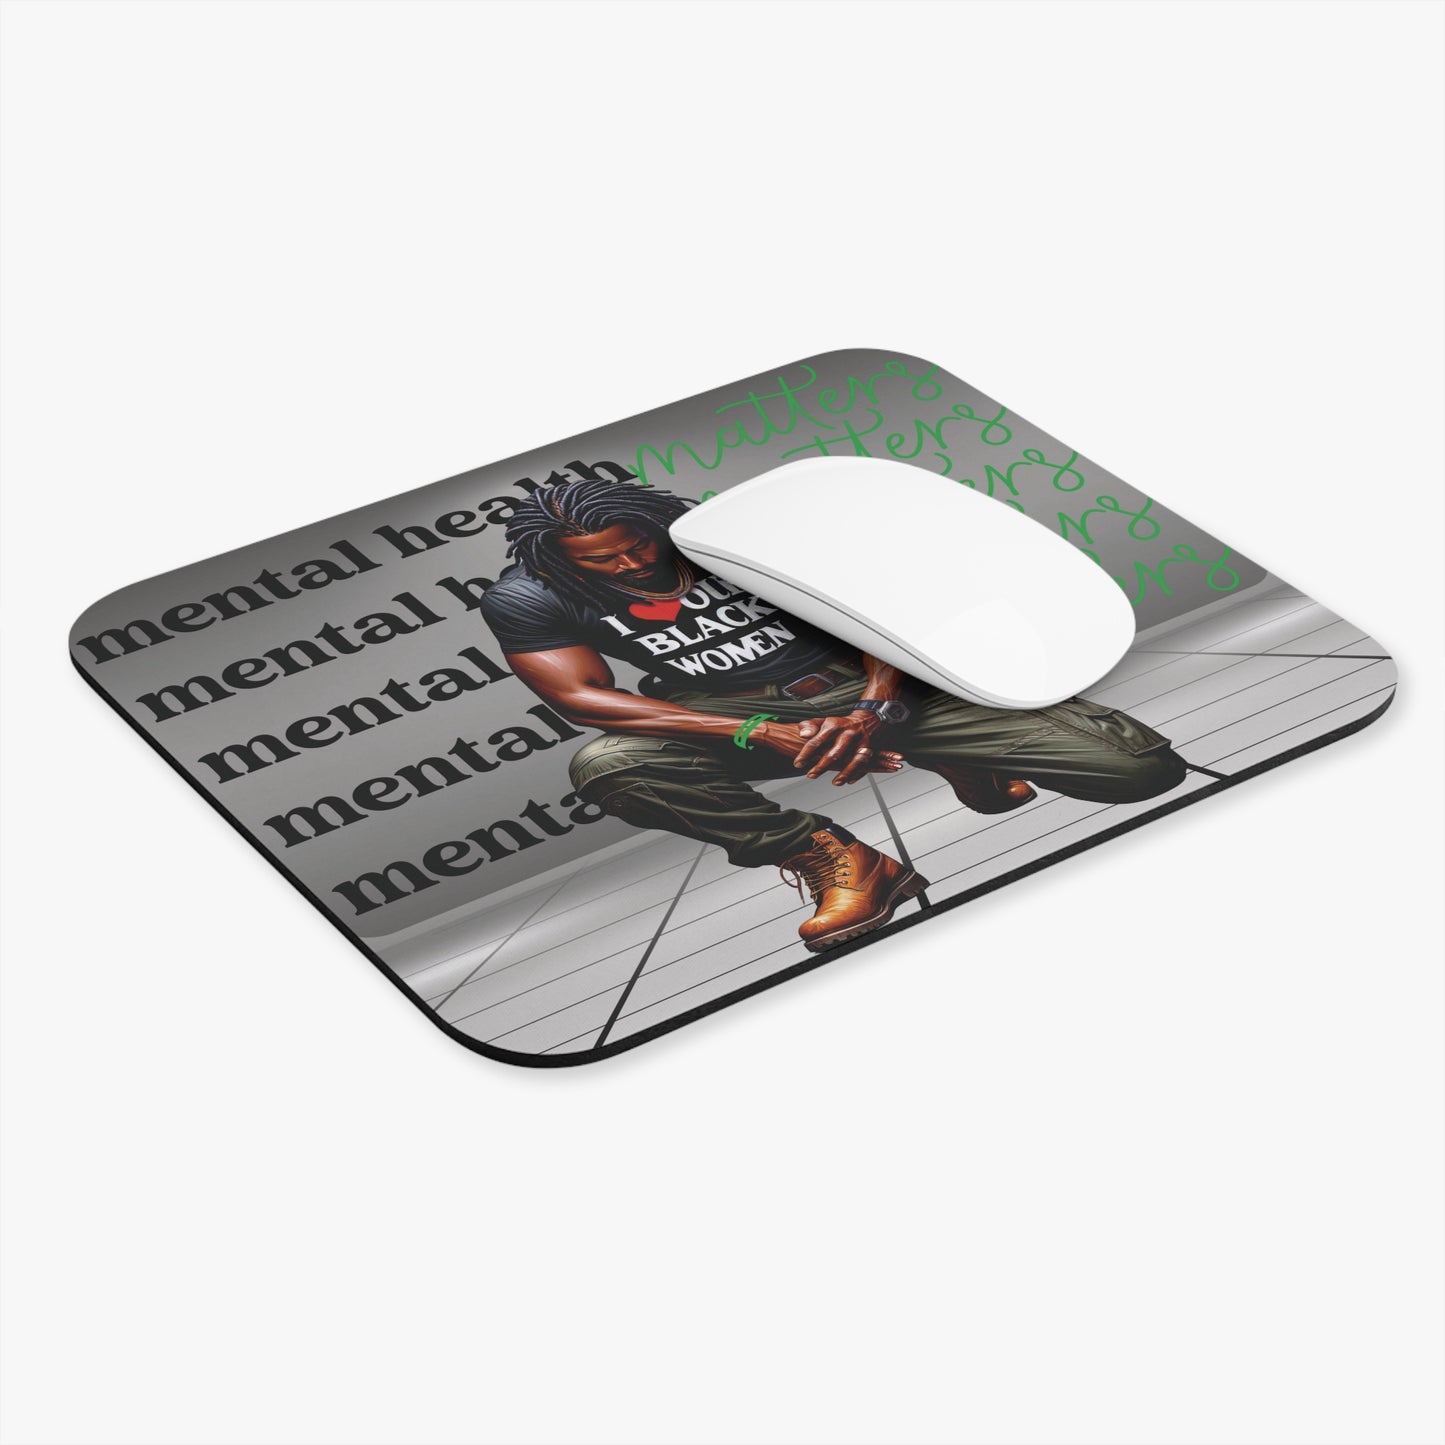 His Mental Health Matters Mouse Pad